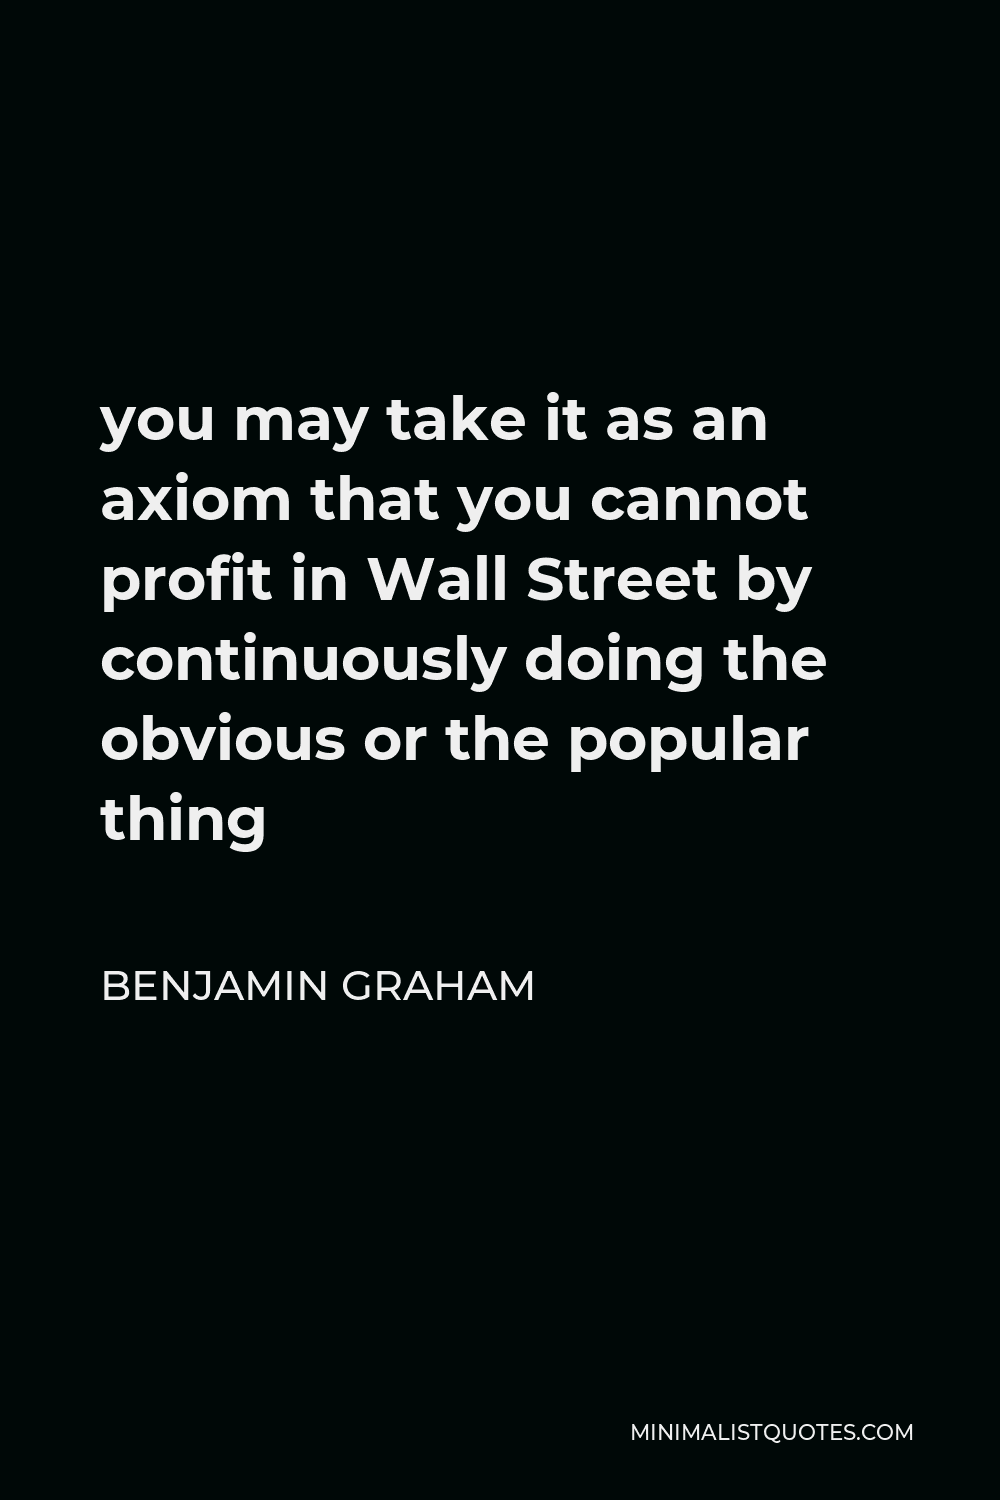 Benjamin Graham Quote - you may take it as an axiom that you cannot profit in Wall Street by continuously doing the obvious or the popular thing